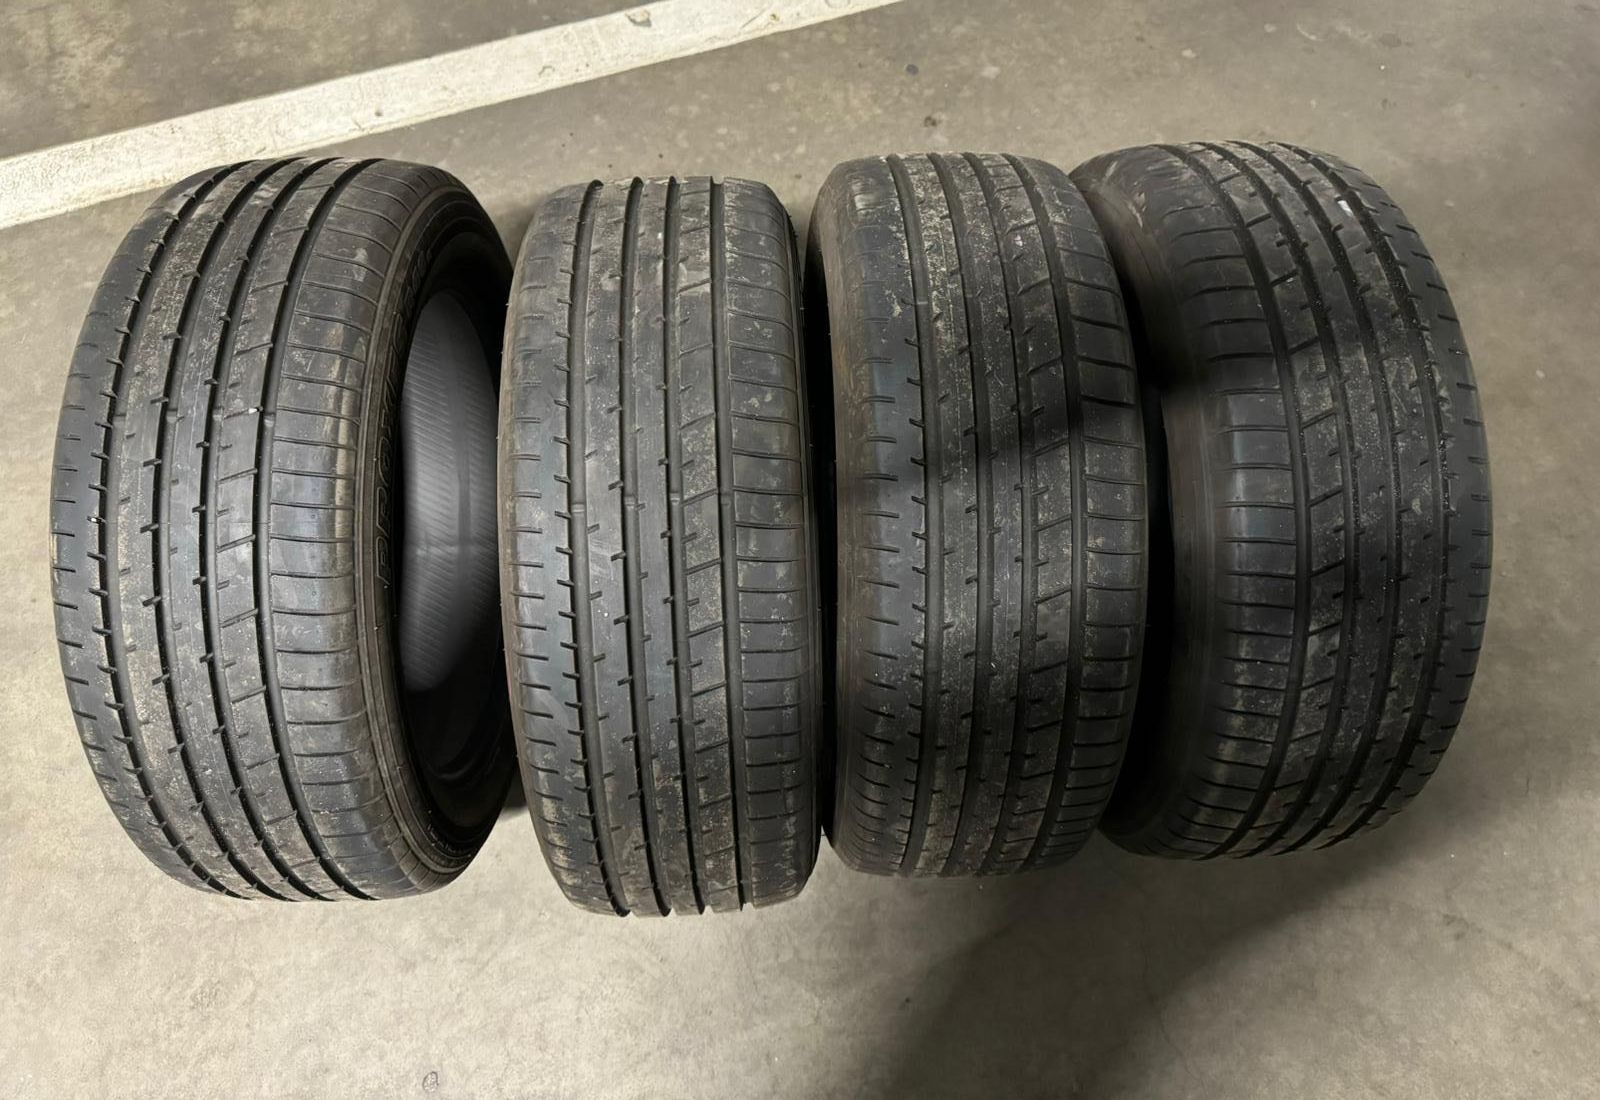 4x komplet nowych opon letnich Toyo Proxes R46A 225/55 R19 99 V